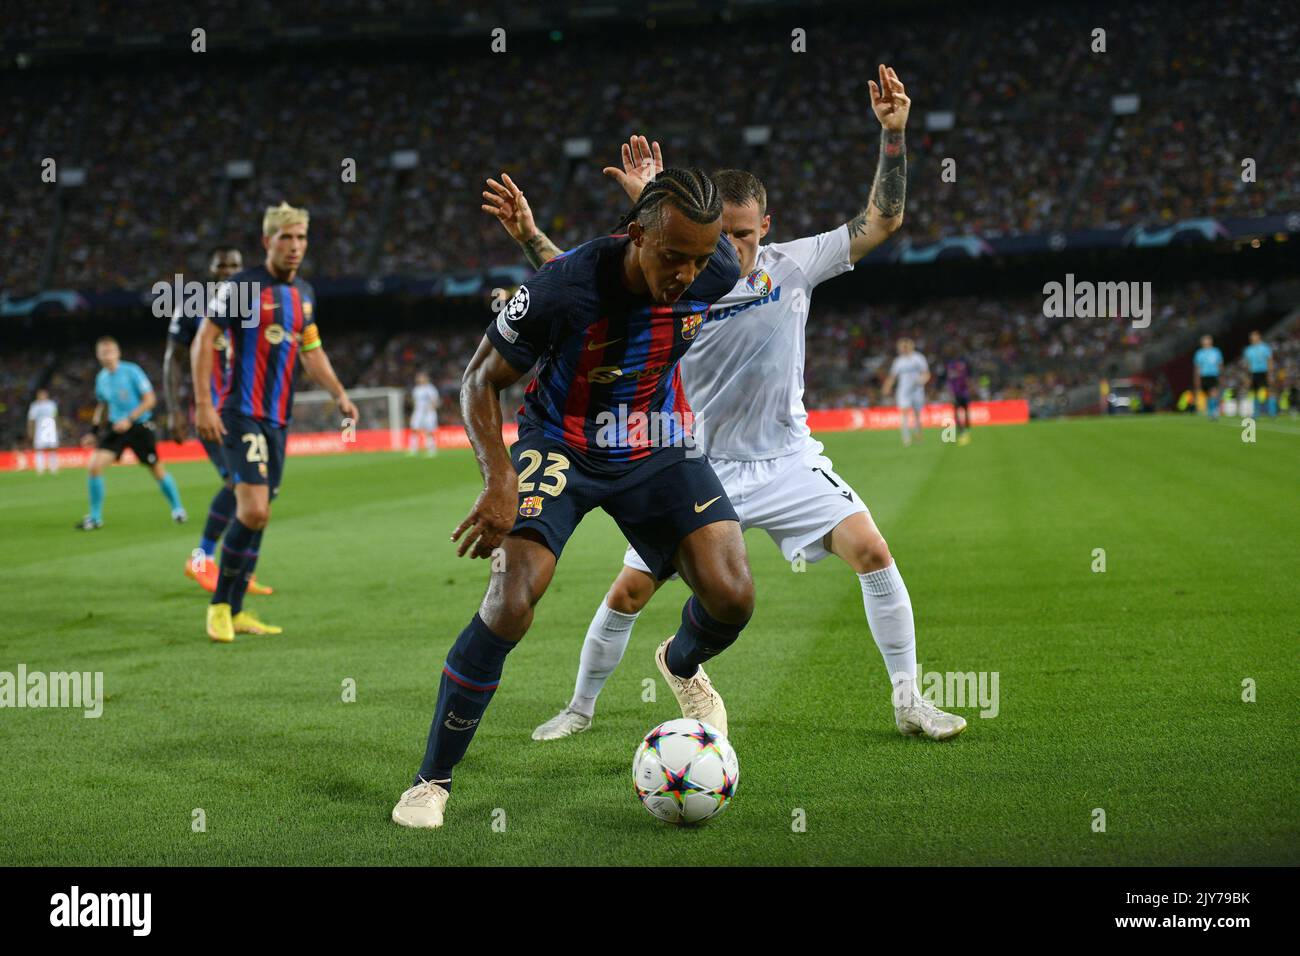 Barcelona, Spain. 07th Sep, 2022. FC BARCELONA vs FC VIKTORIA PLZEN Jules Kounde (23) of FC Barcelona during the match between FC Barcelona and FC Viktoria Plzen corresponding to the first day of the group stage of the UEFA Champions League at Spotify Camp Nou Stadium in Barcelona, Spain. September 7, 2022. Credit: rosdemora/Alamy Live News Stock Photo